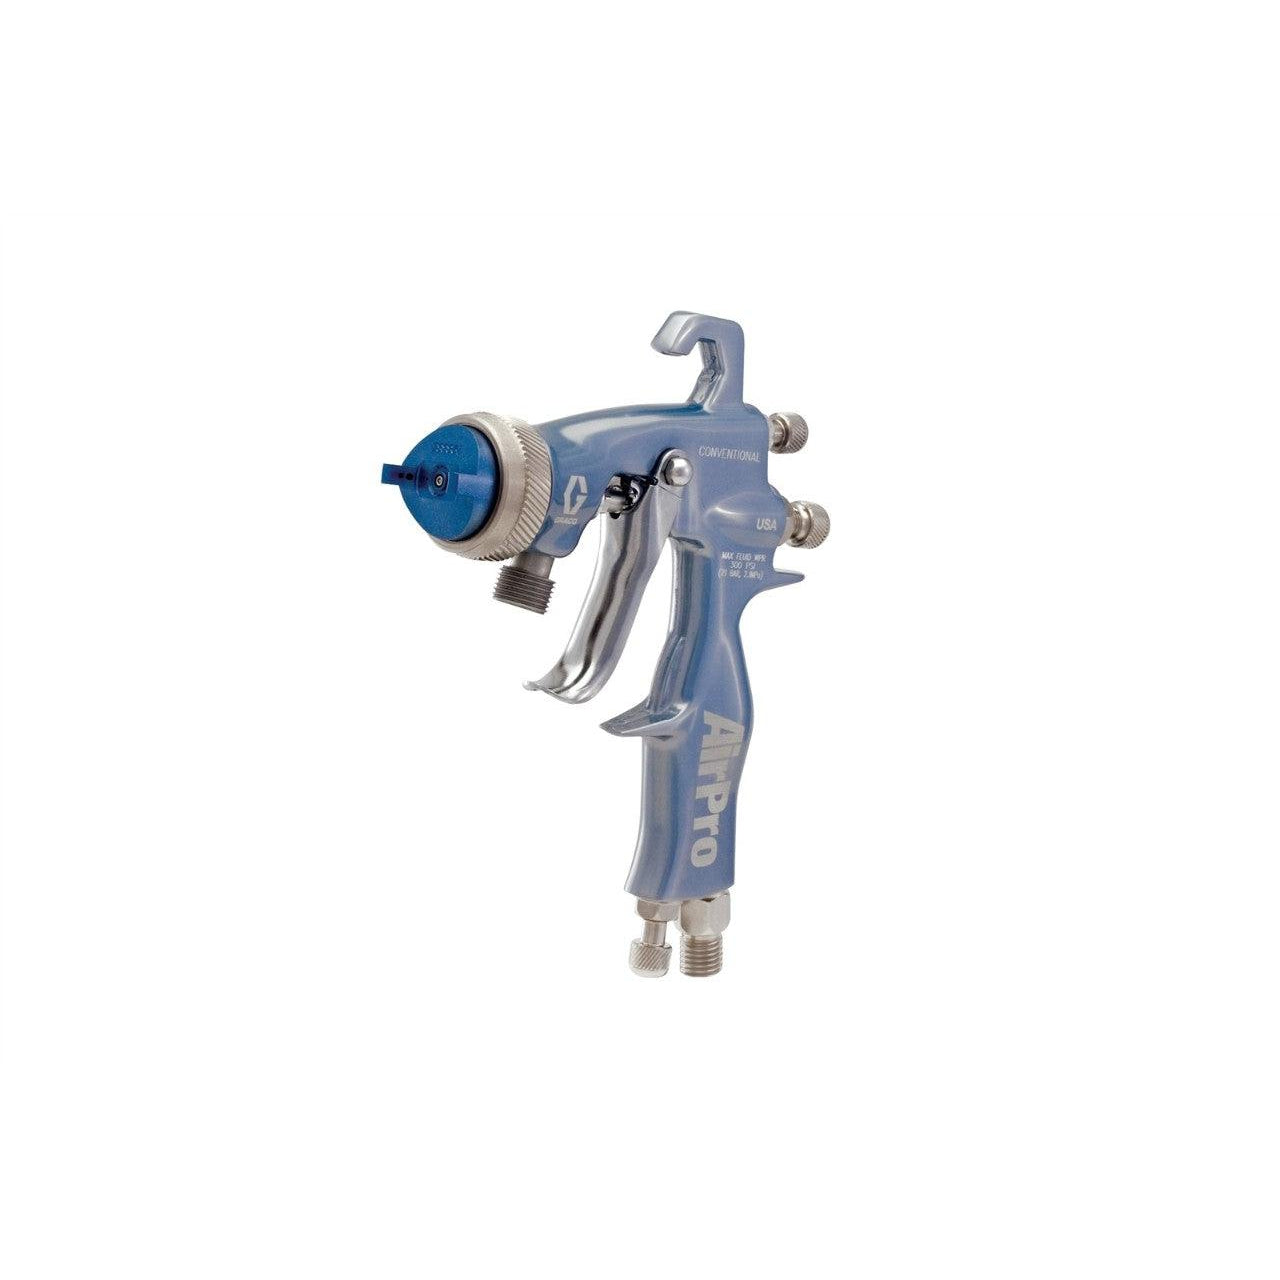 AirPro Air Spray Pressure Feed Gun, Conventional, 0.030 inch (0.8 mm) Nozzle, for General Metal Applications